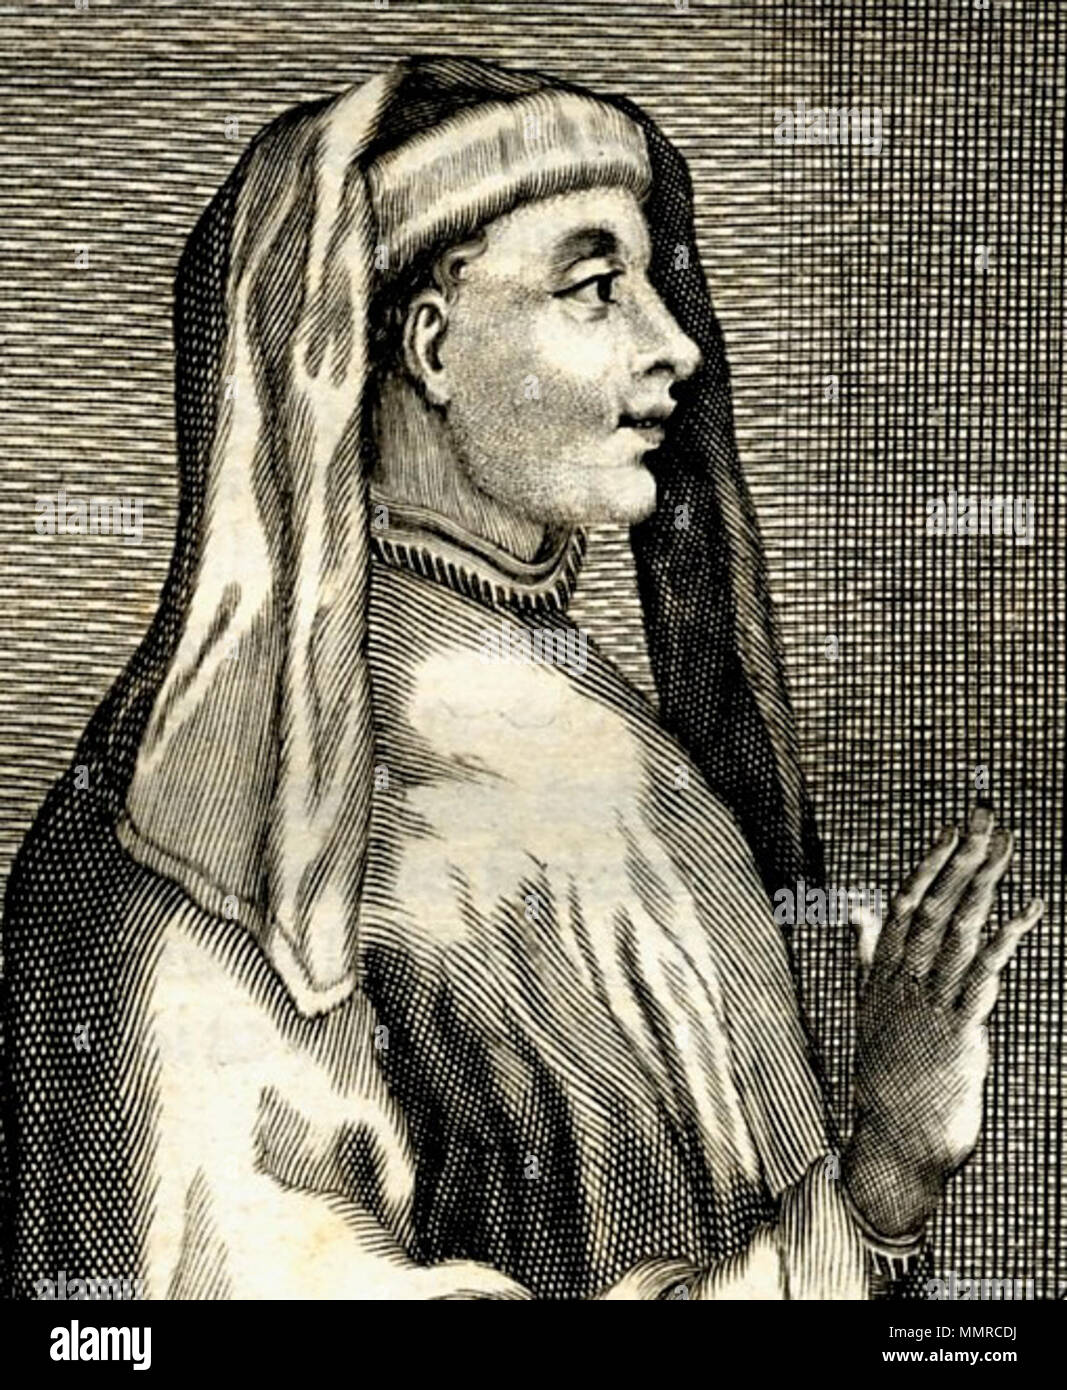 .  English: Cropped portrait of Guiniforte Barzizza (Pavia, 1406 - Milan, 1463), Italian humanist scholar and teacher of Galeazzo Maria and Ippolita Maria Sforza. An earlier version of this engraving was published in Scena letteraria de gli scrittori bergamaschi in 1664. This reversed copy was made for the 1723 Gasparini Barzizii Bergomatis Et Guiniforti Filii Opera, and a copy was made in 1783 by Vincenzo Angelo Orelli, in oil on canvas.  . Publ. 1723.. Barzizza-guiniforte-anton-fritz-1723-detail Stock Photo